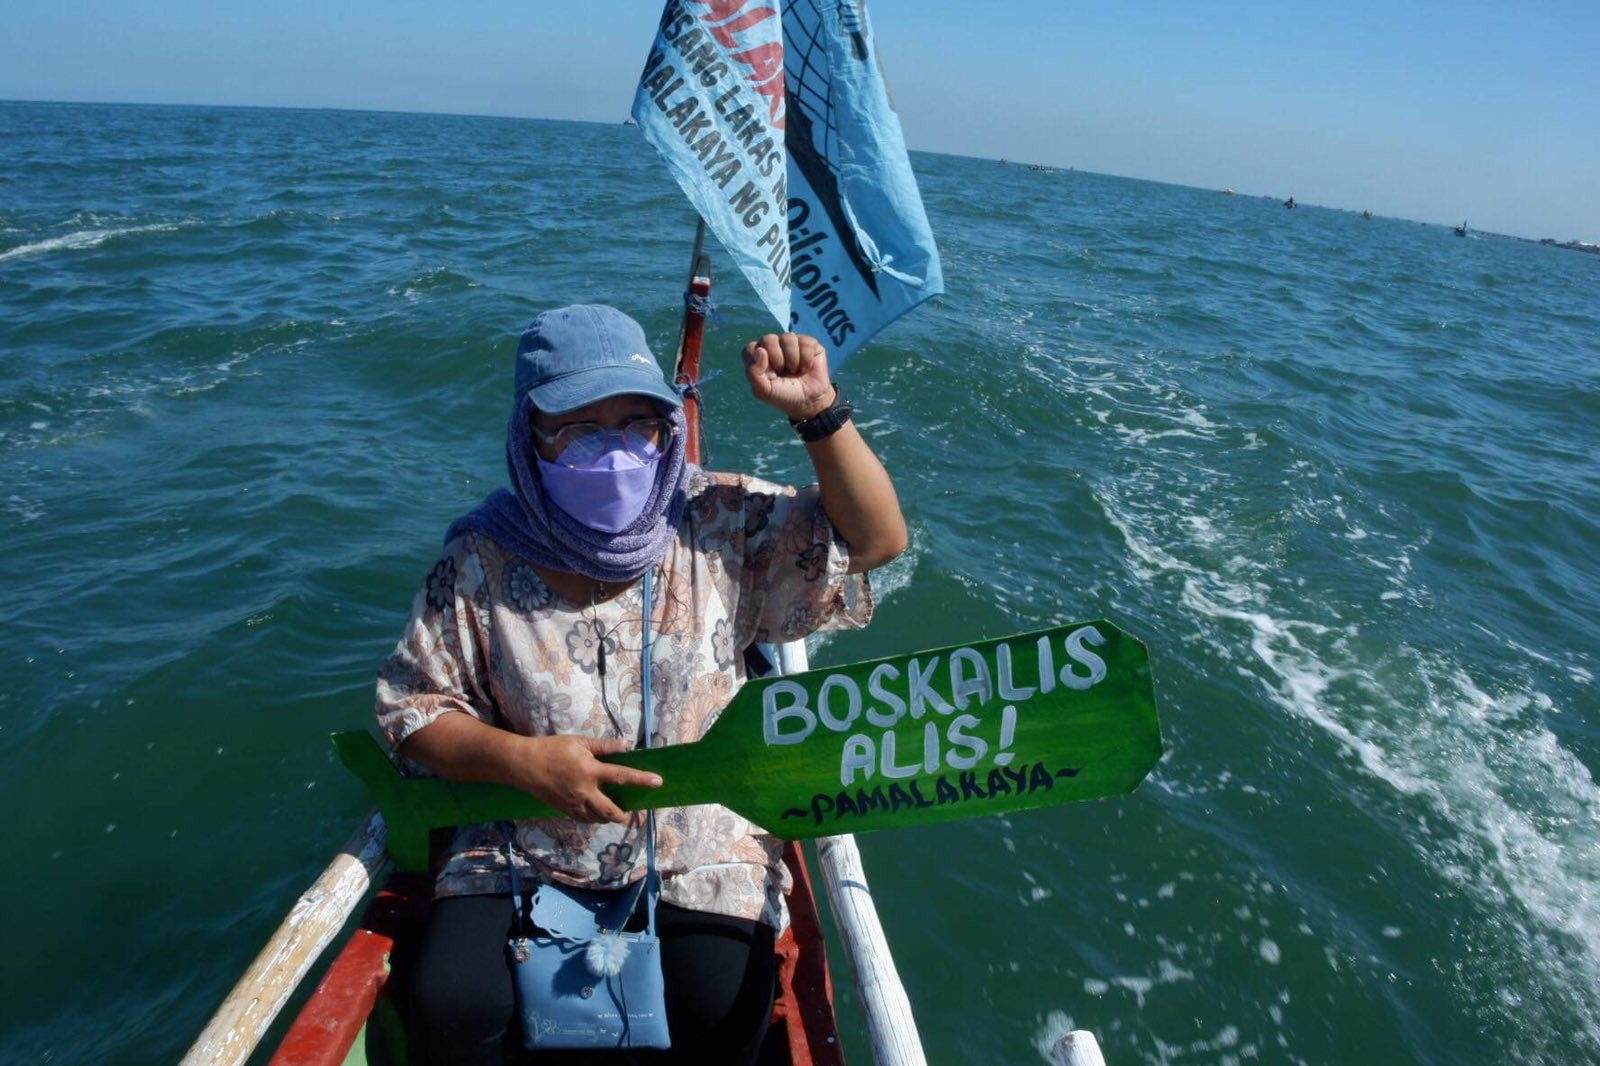 At least 11 fisherfolk stage a fluvial protest against dredging activities in Manila Bay on Tuesday, March 14, 2023.